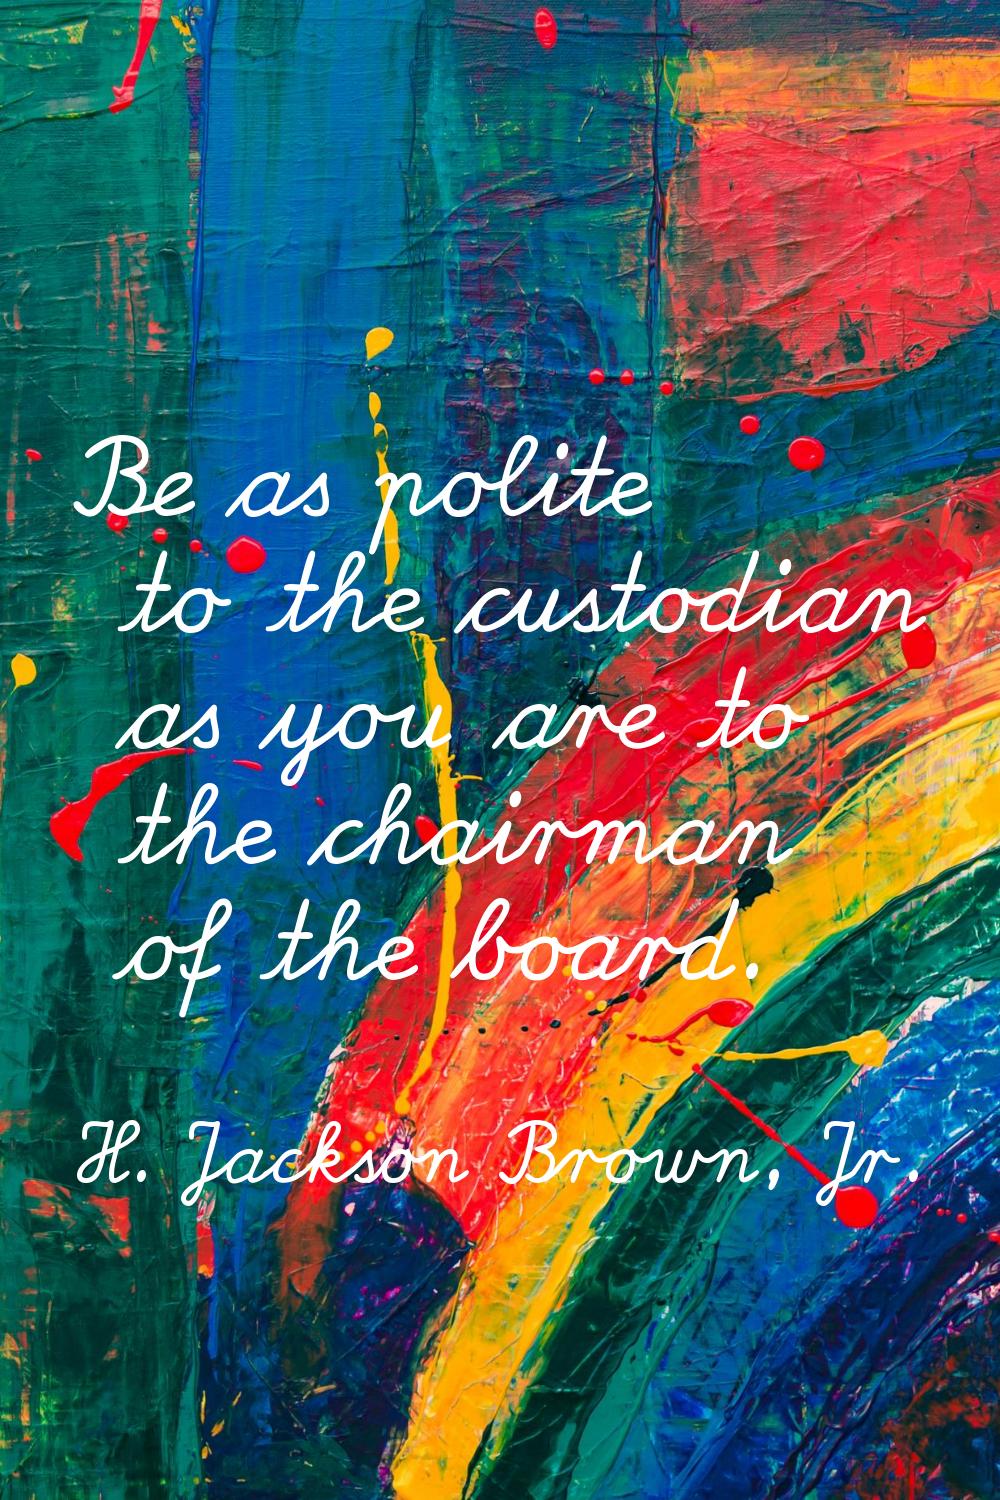 Be as polite to the custodian as you are to the chairman of the board.